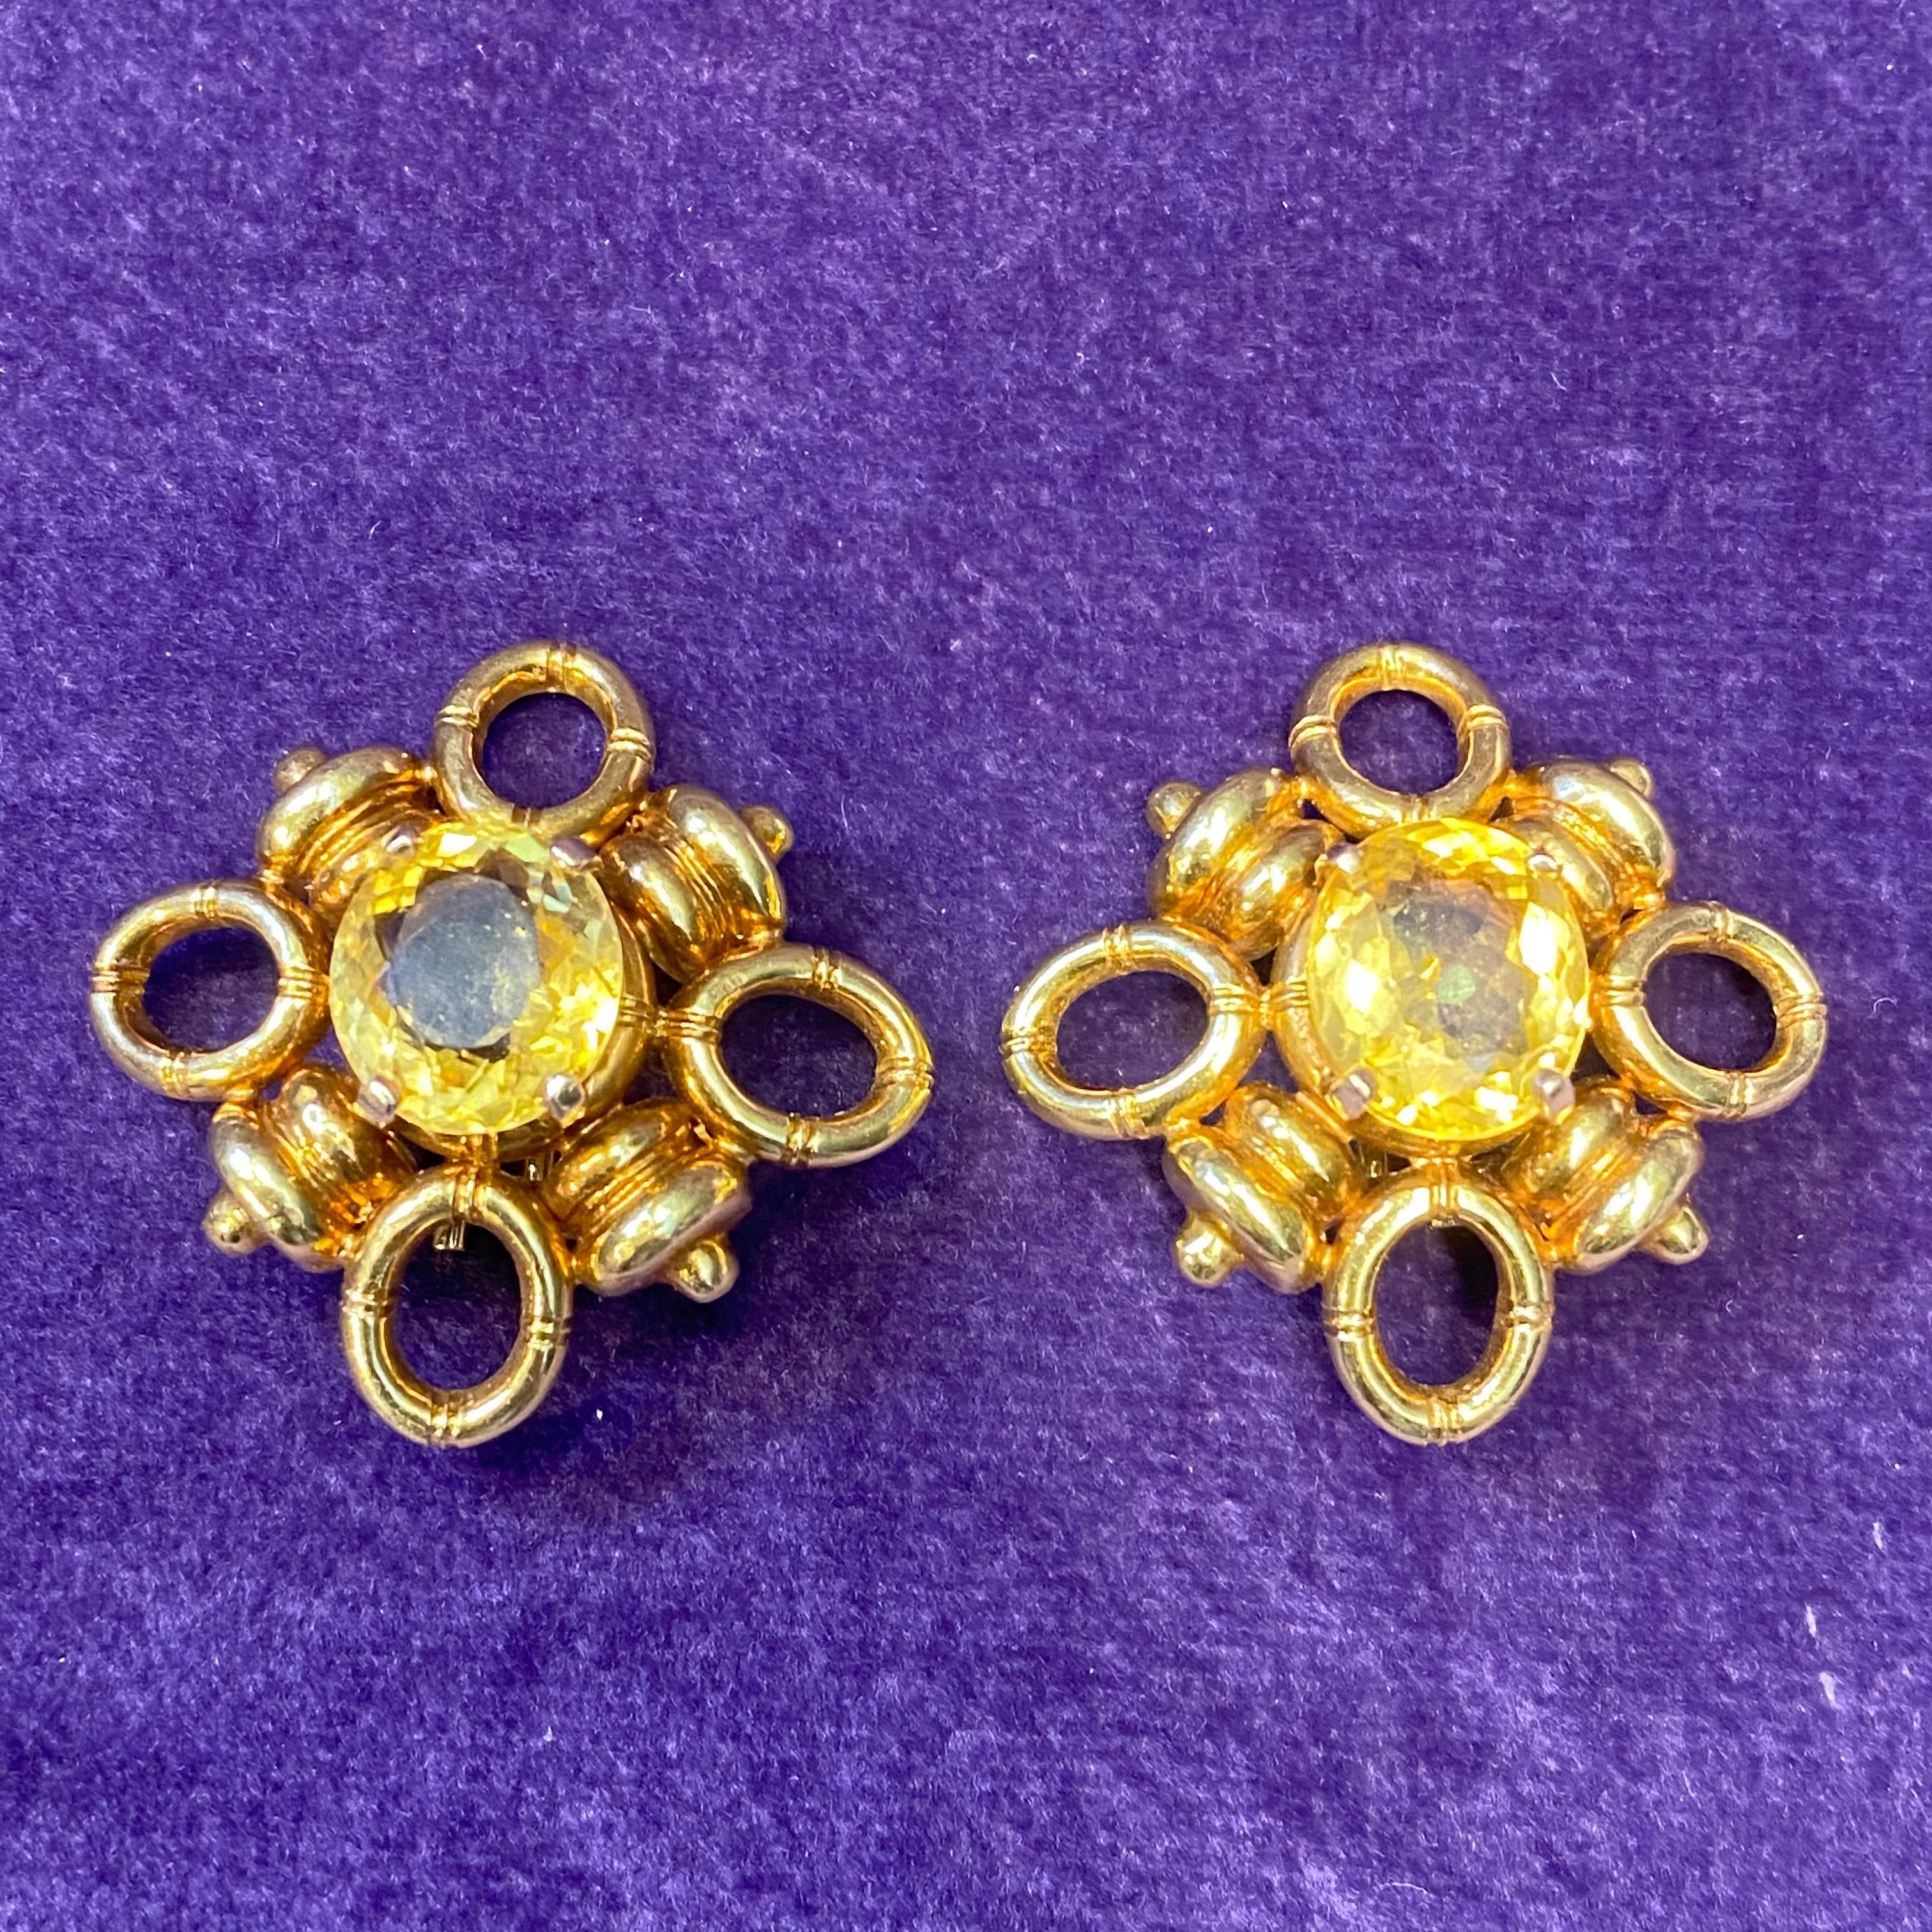 Tiffany and Co Retro Citrine Earrings In Excellent Condition For Sale In New York, NY